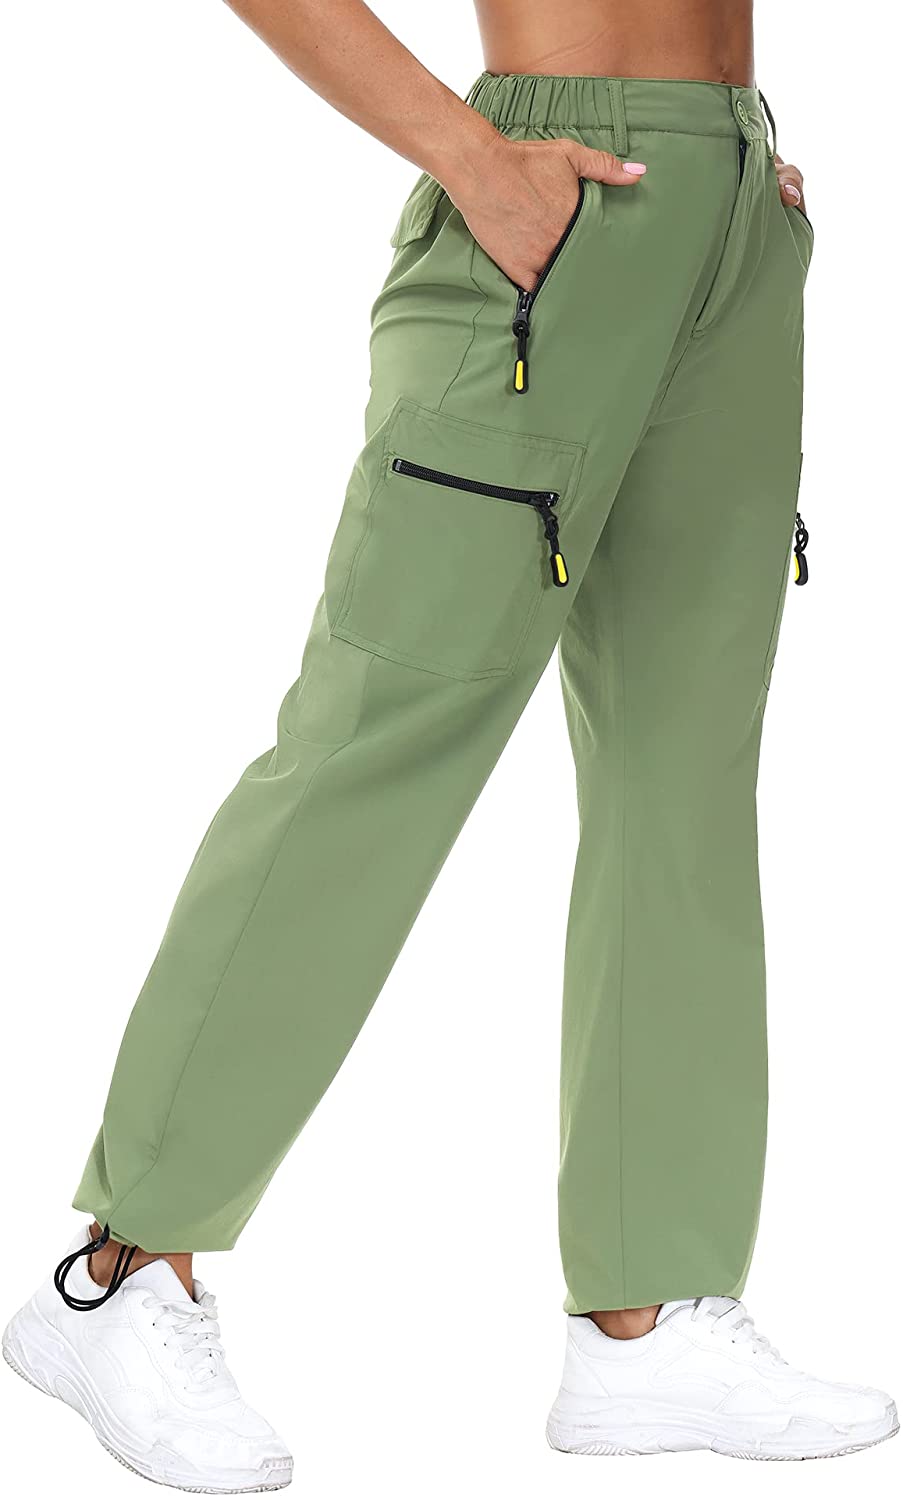 VVK Women's Hiking Cargo Pants Lightweight Quick Dry Outdoor Athletic Pants  Camp